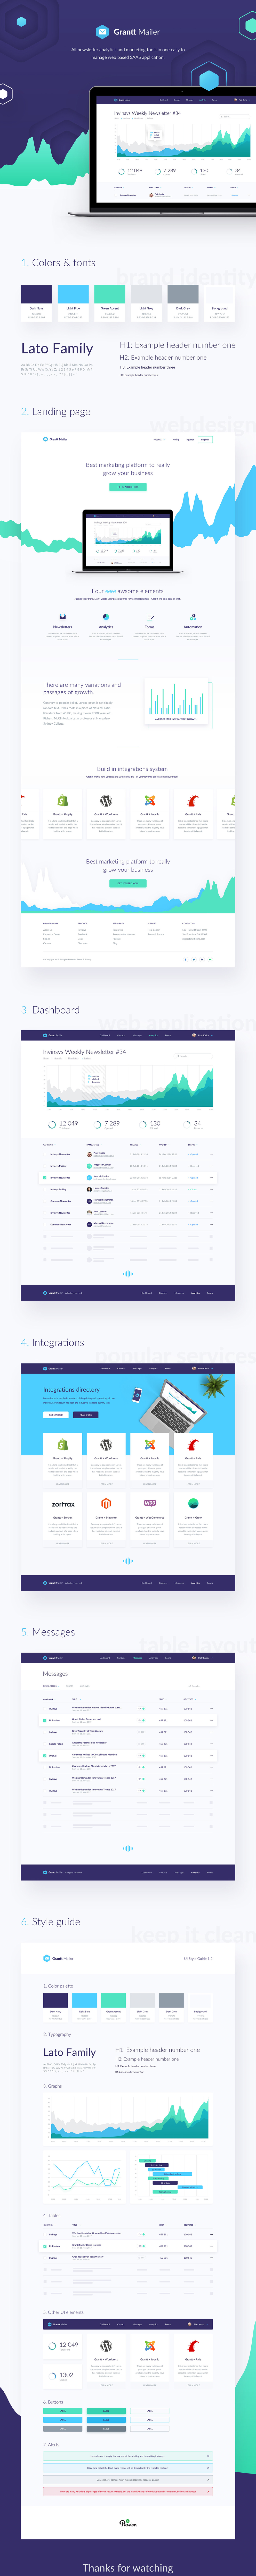 dashboard Webdesign UI ux landing page user interface graph mail newsletter